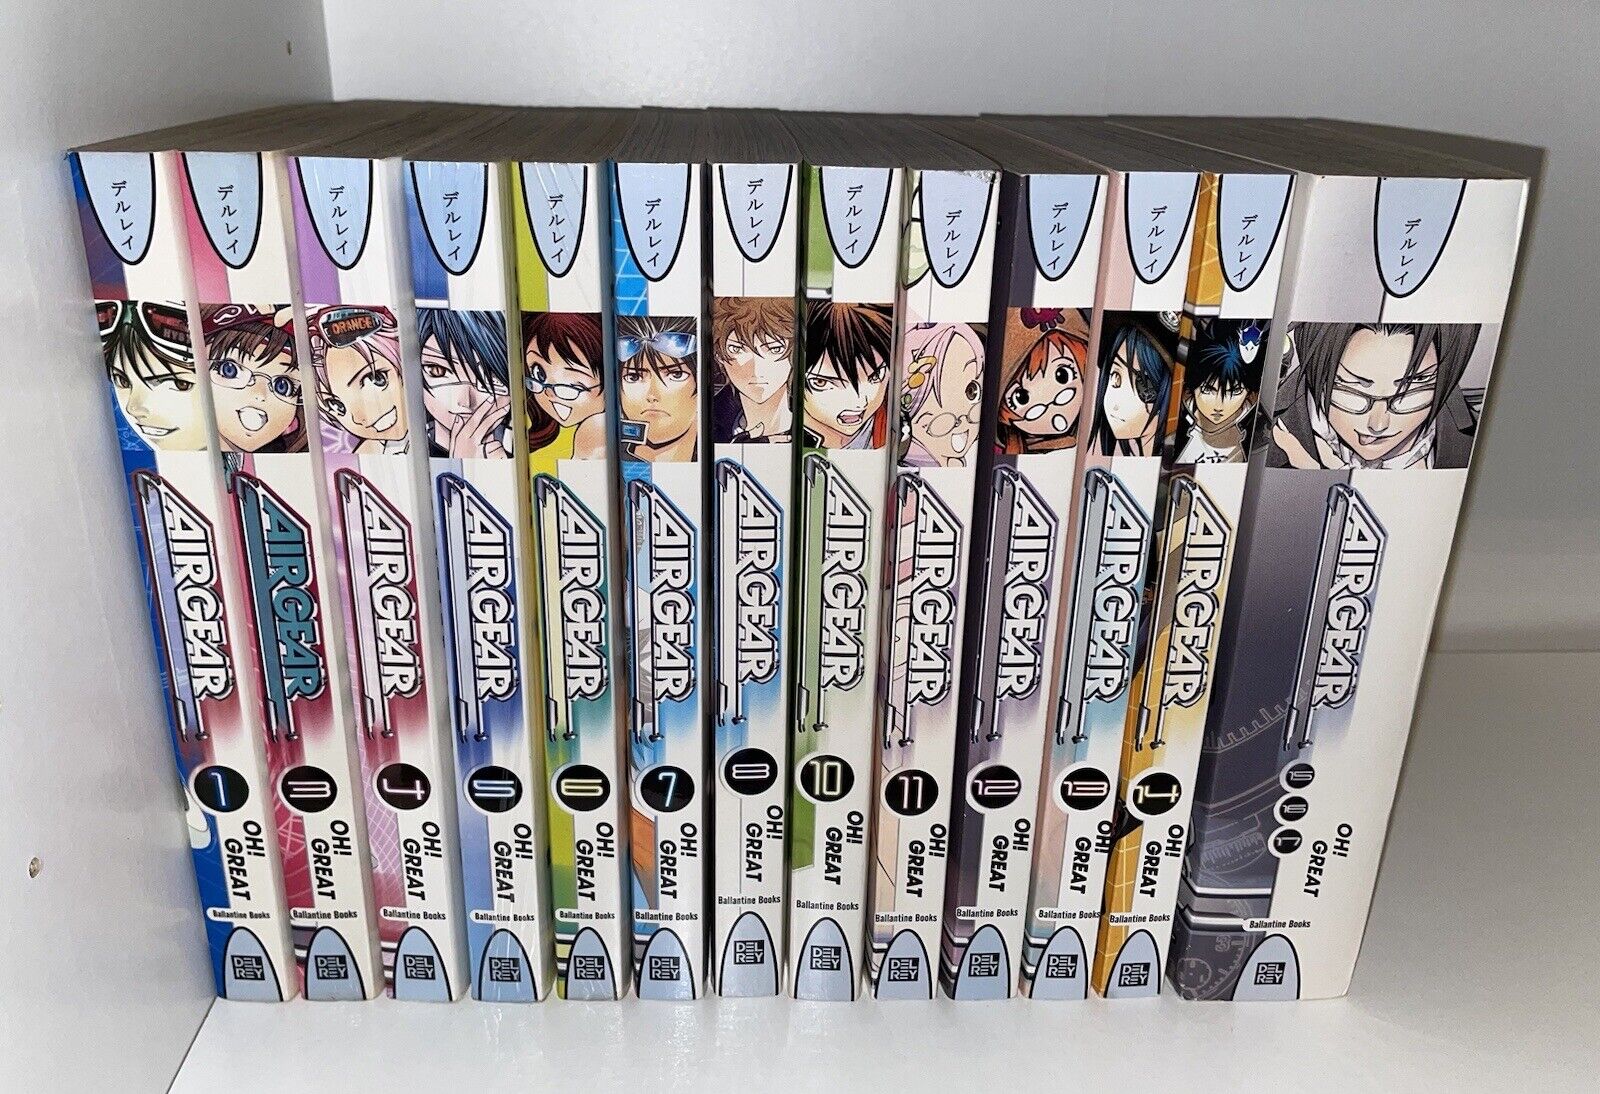 Air Gear Vol. 1-17 (Without Vol. 2 & 9) - Del Ray Manga English by Oh Great